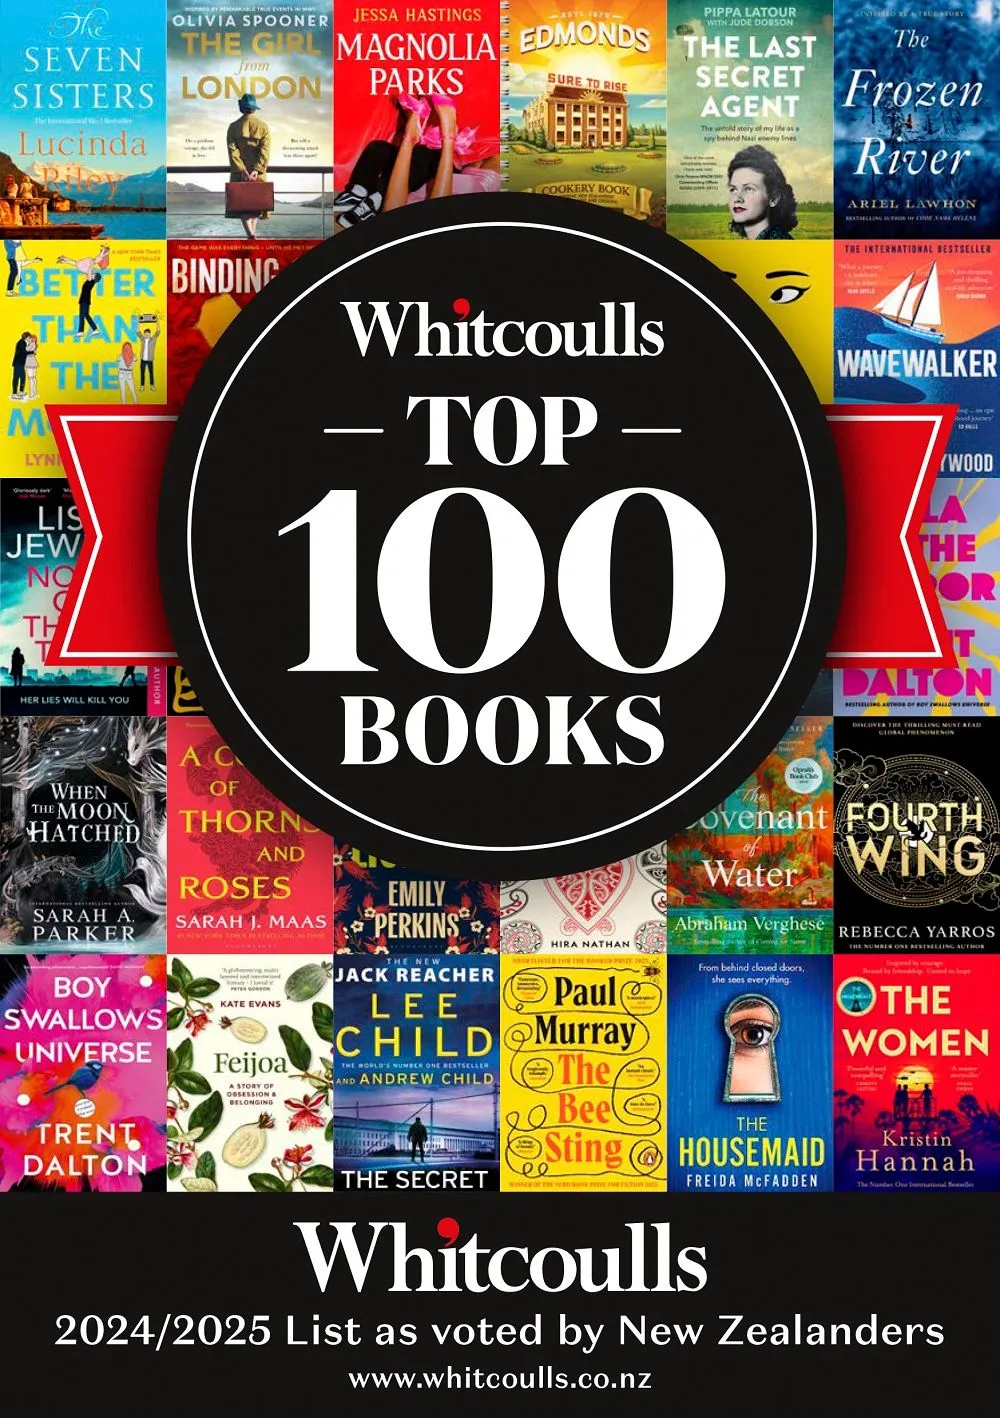 Kiwi readers vote for record number of new books in annual Whitcoulls Top 100 List